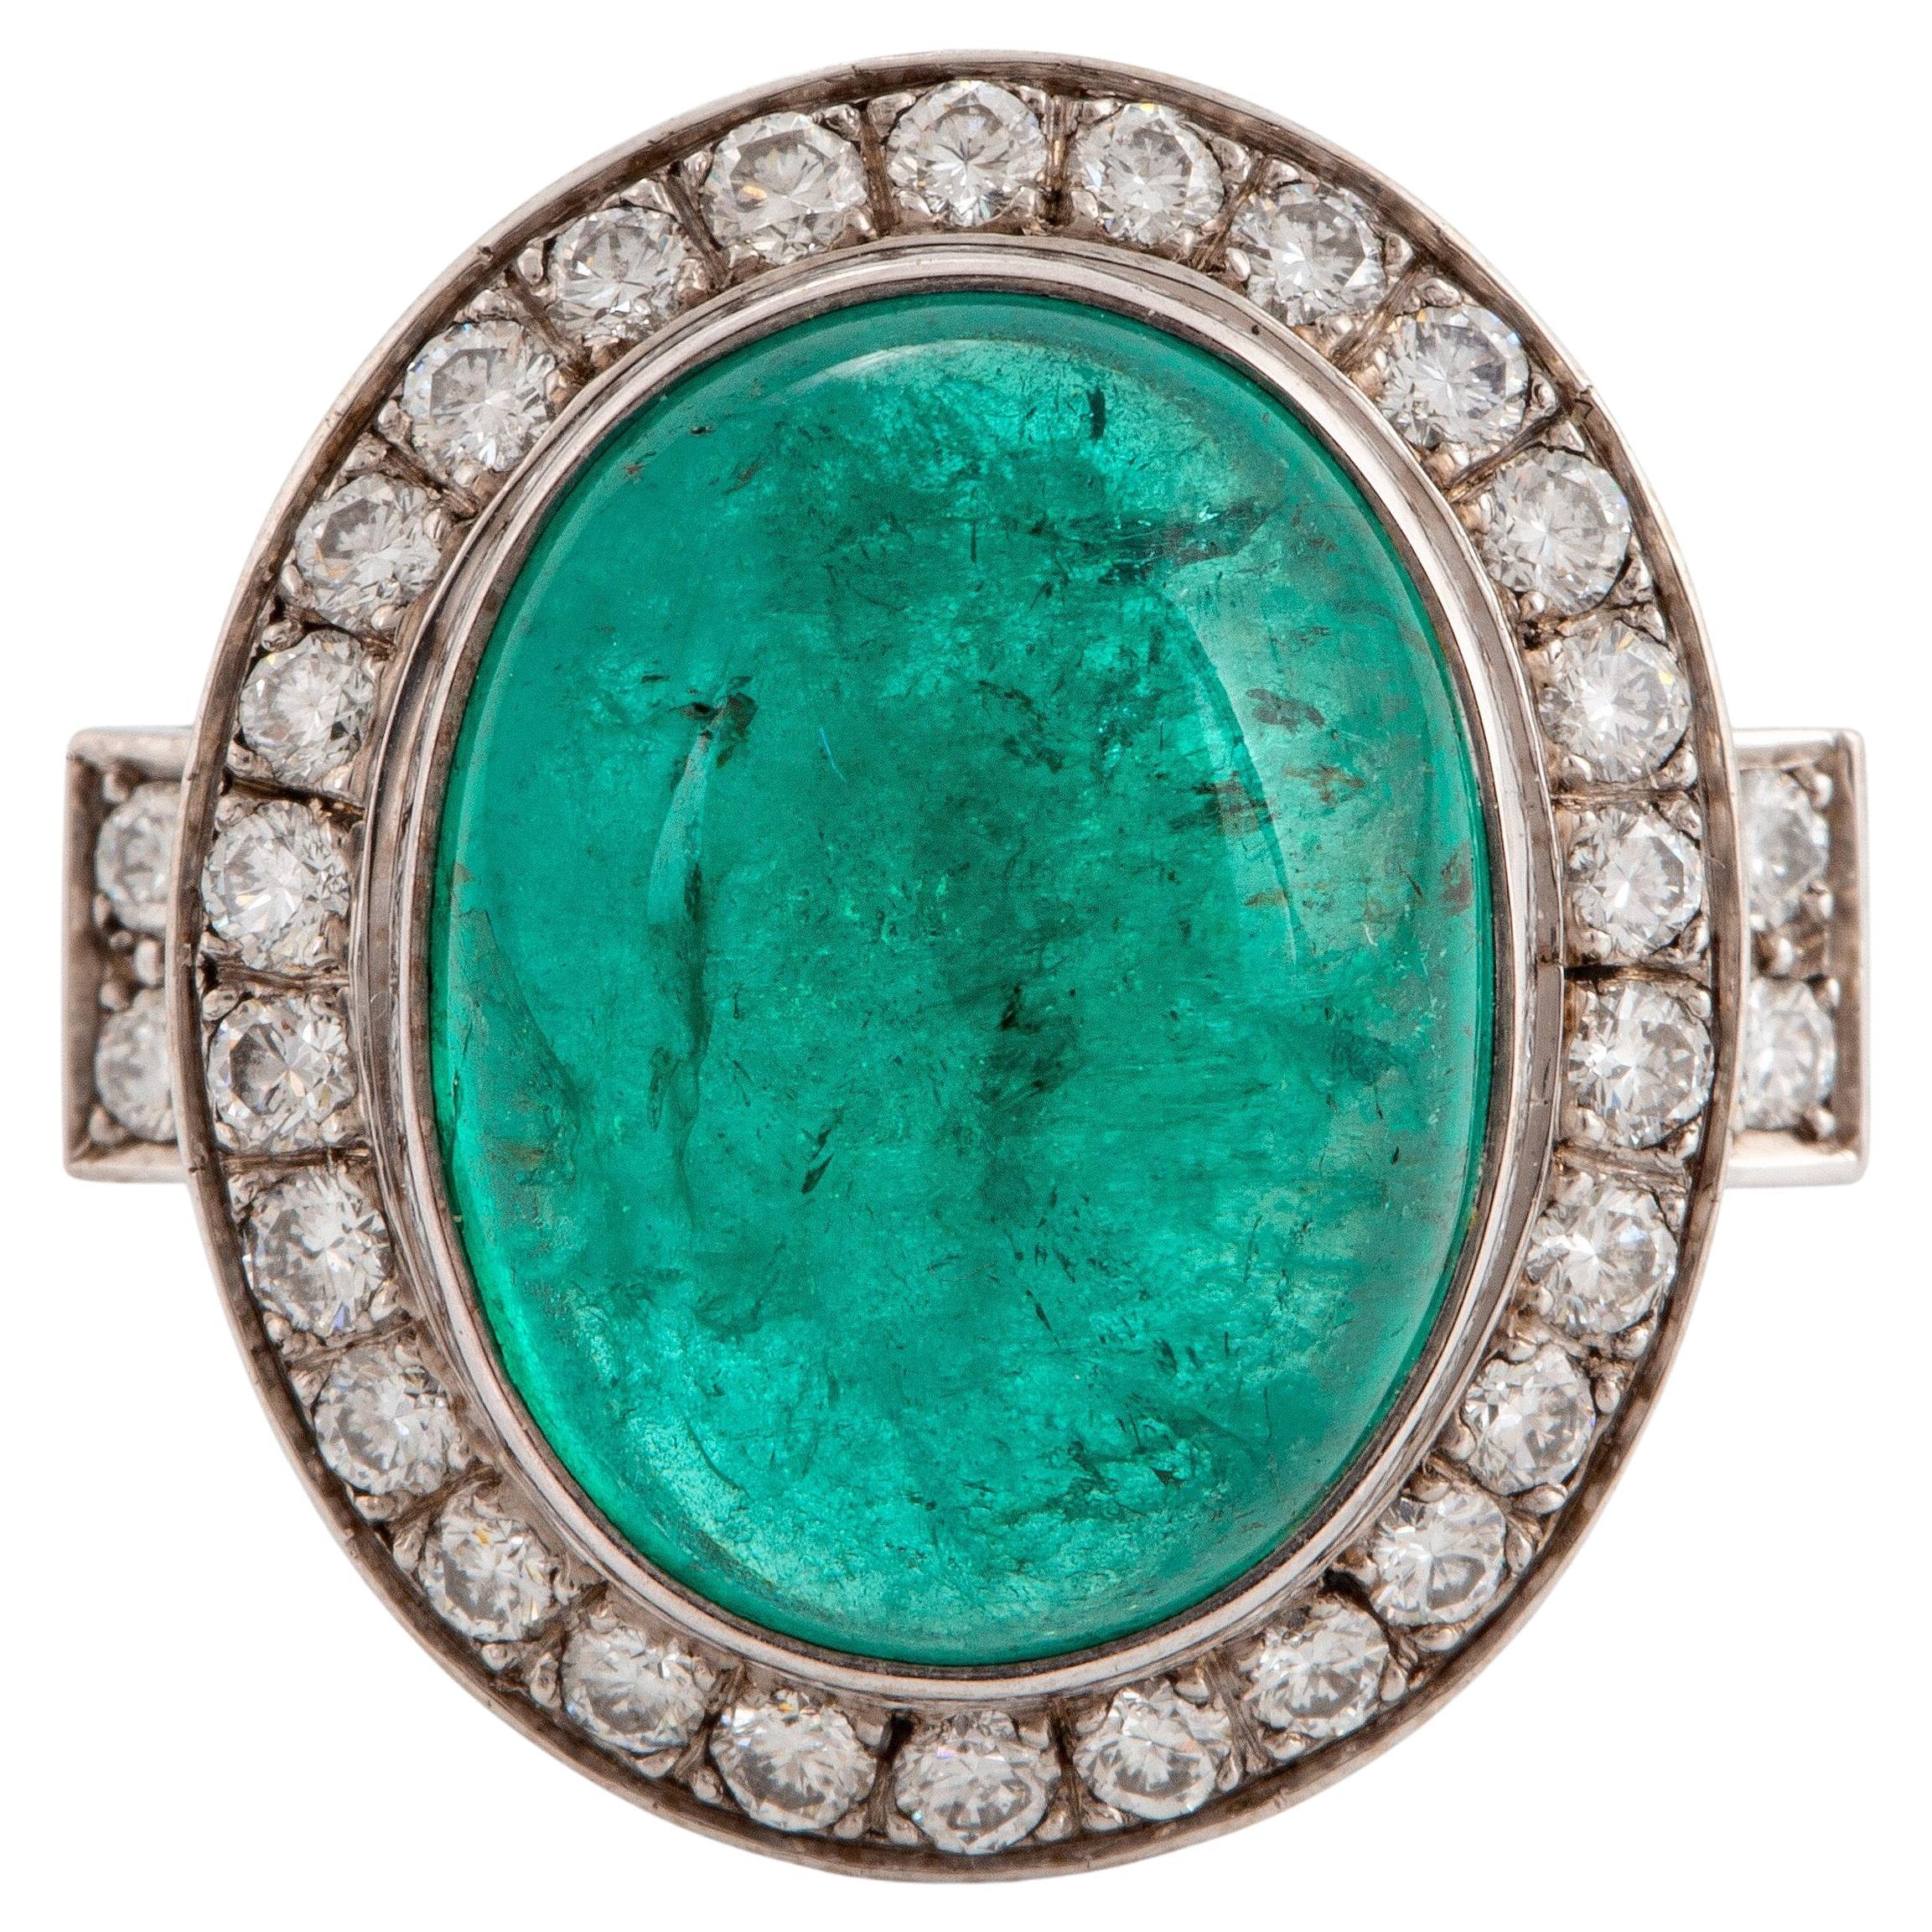 10ct Colombian cabochon emerald ring